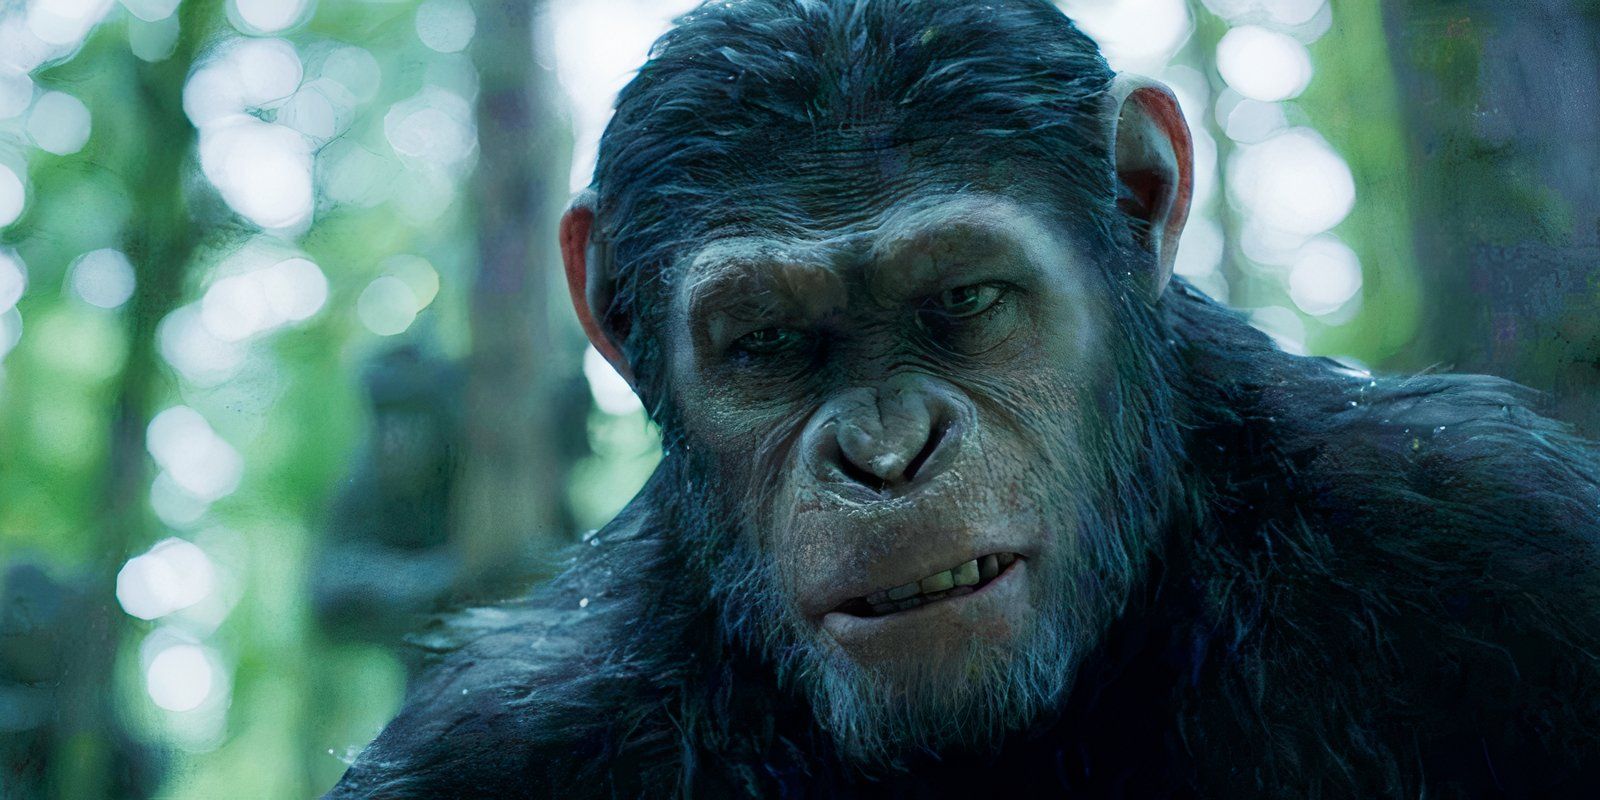 "So Realistic": Matt Reeves' First Planet Of The Apes Movie Gets High Praise From Ape Expert